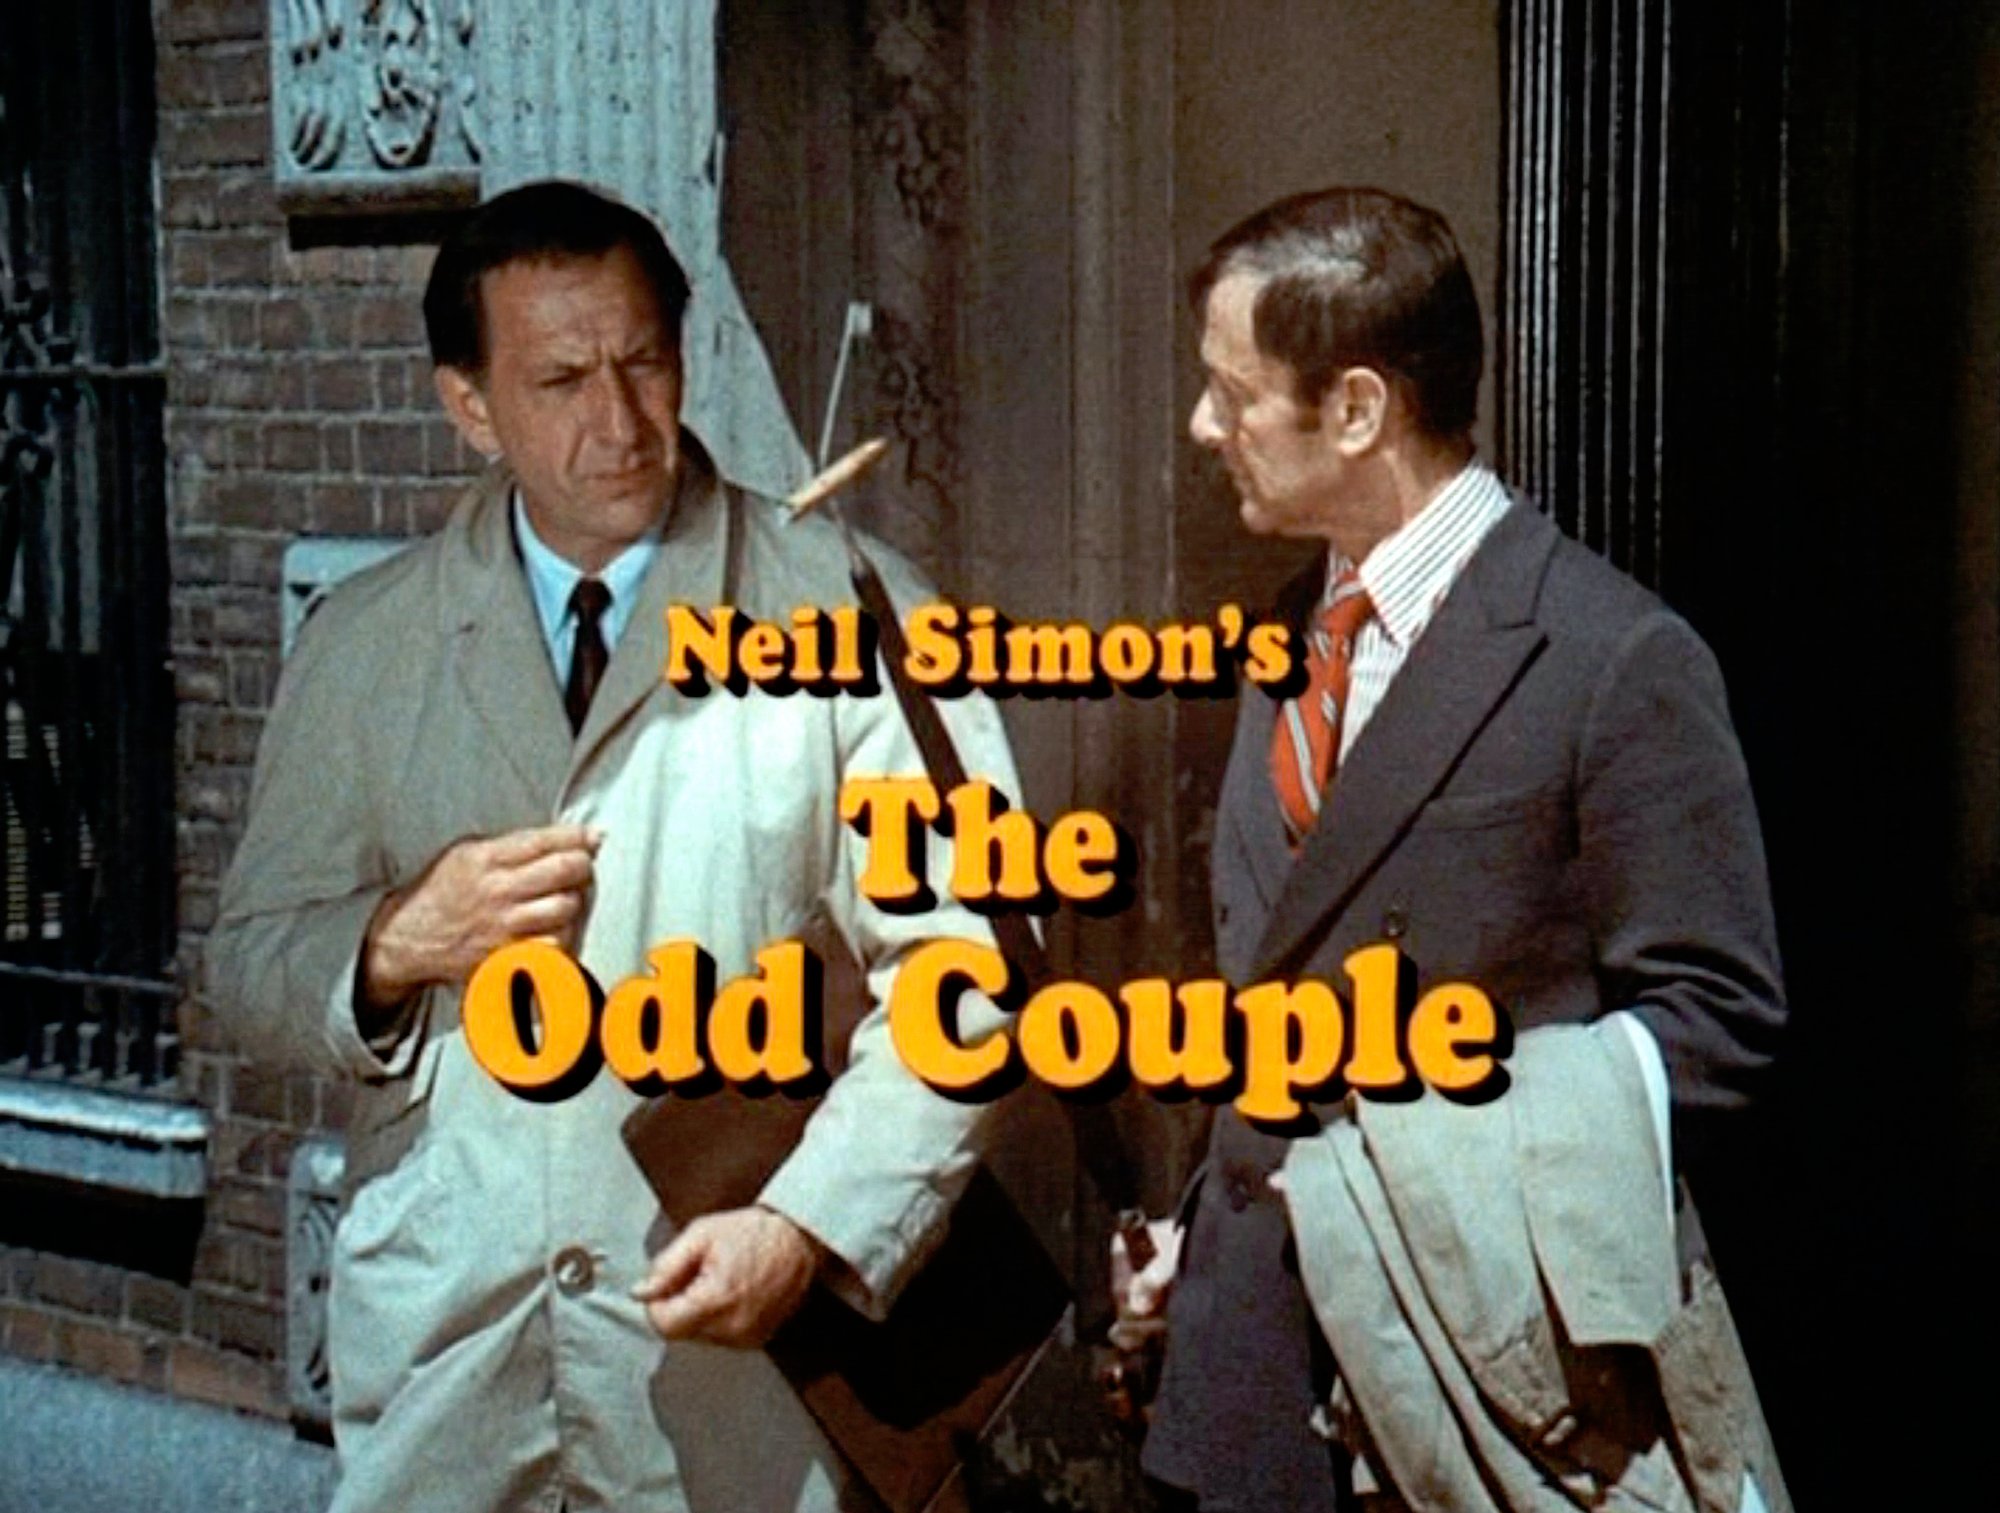 (L-R) Jack Klugman as Oscar Madison and Tony Randall as Felix Unger with 'The Odd Couple' title overlaid